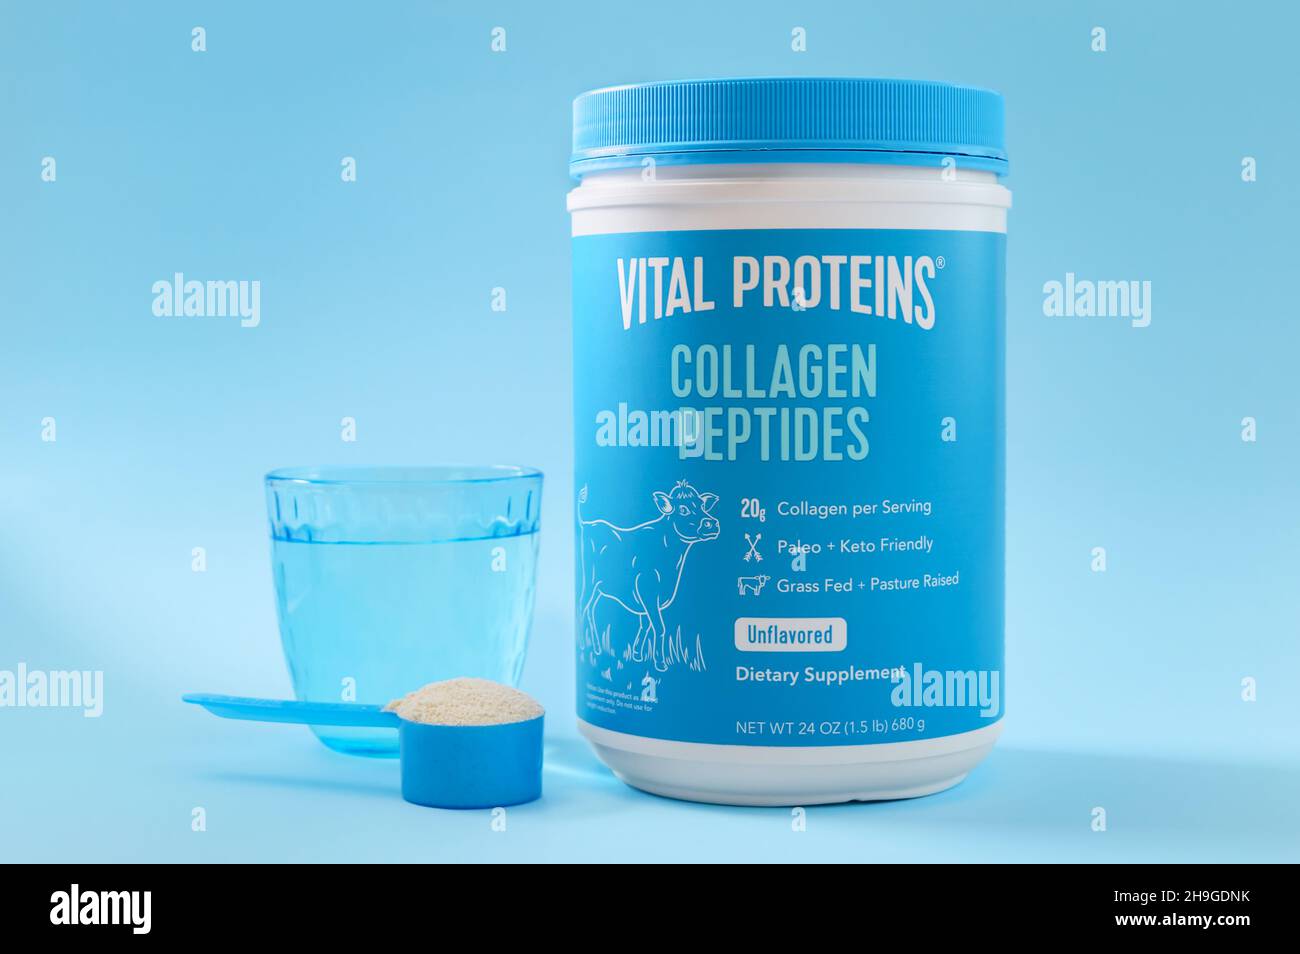 KIEV, UKRAINE-NOVEMBER 10, 2021: Collagen Peptides Powder Jar with a measuring spoon and a glass of water. Famous brand Vital Proteins. Collagen from Stock Photo